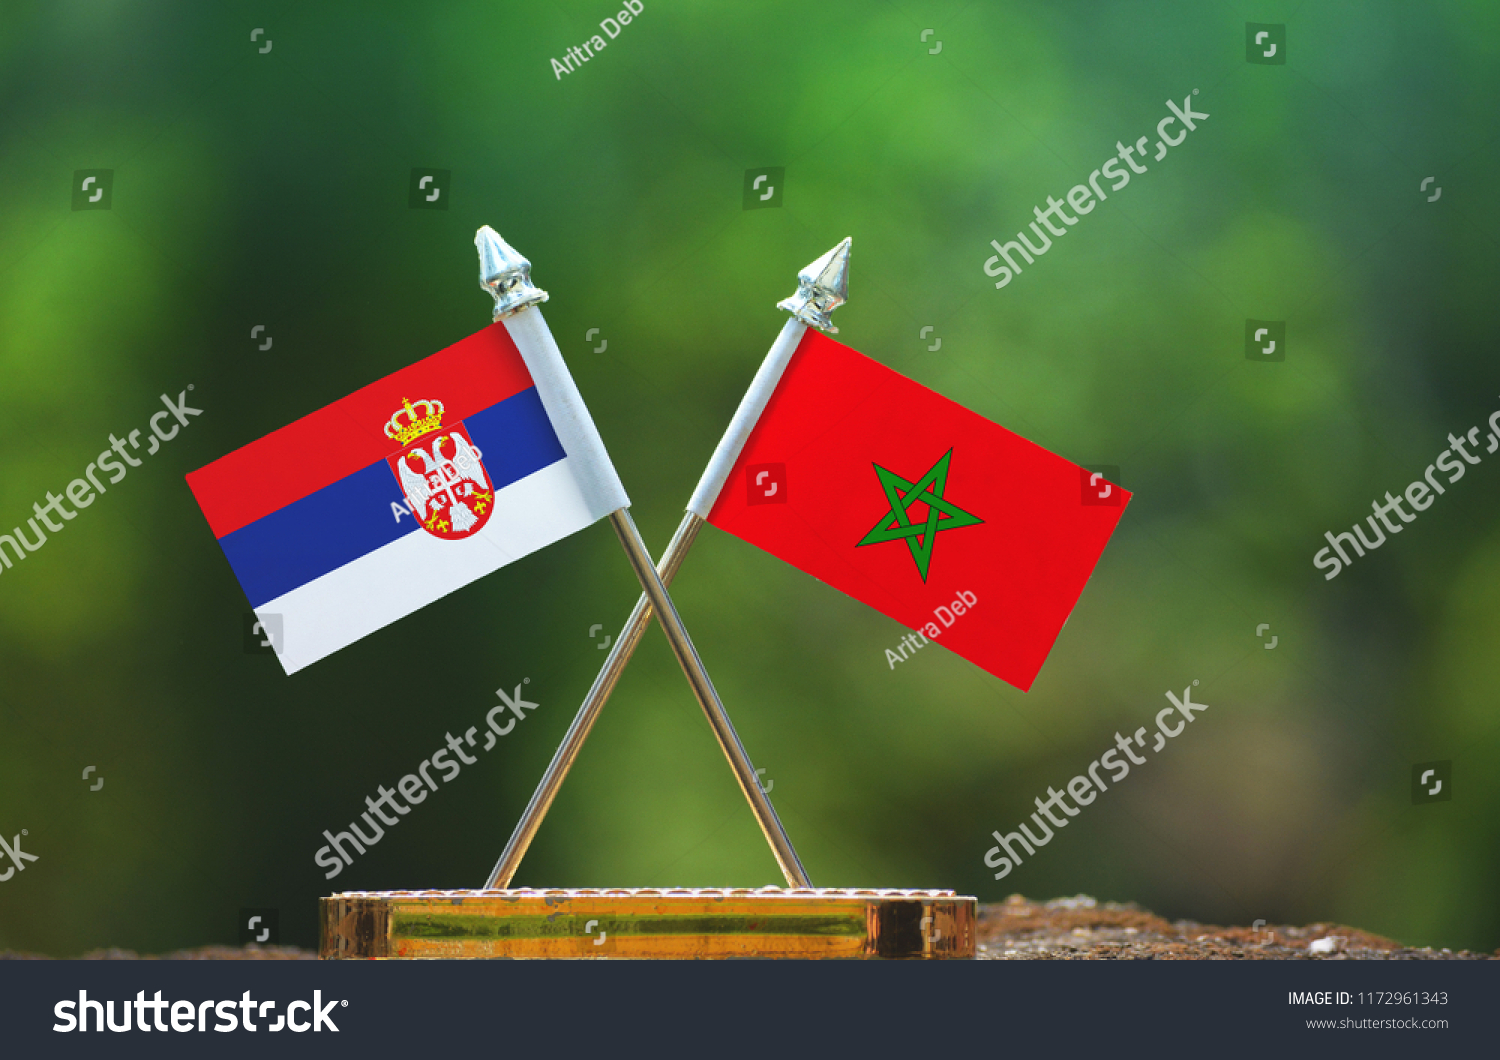 Morocco and Serbia small flag with blur green background #1172961343